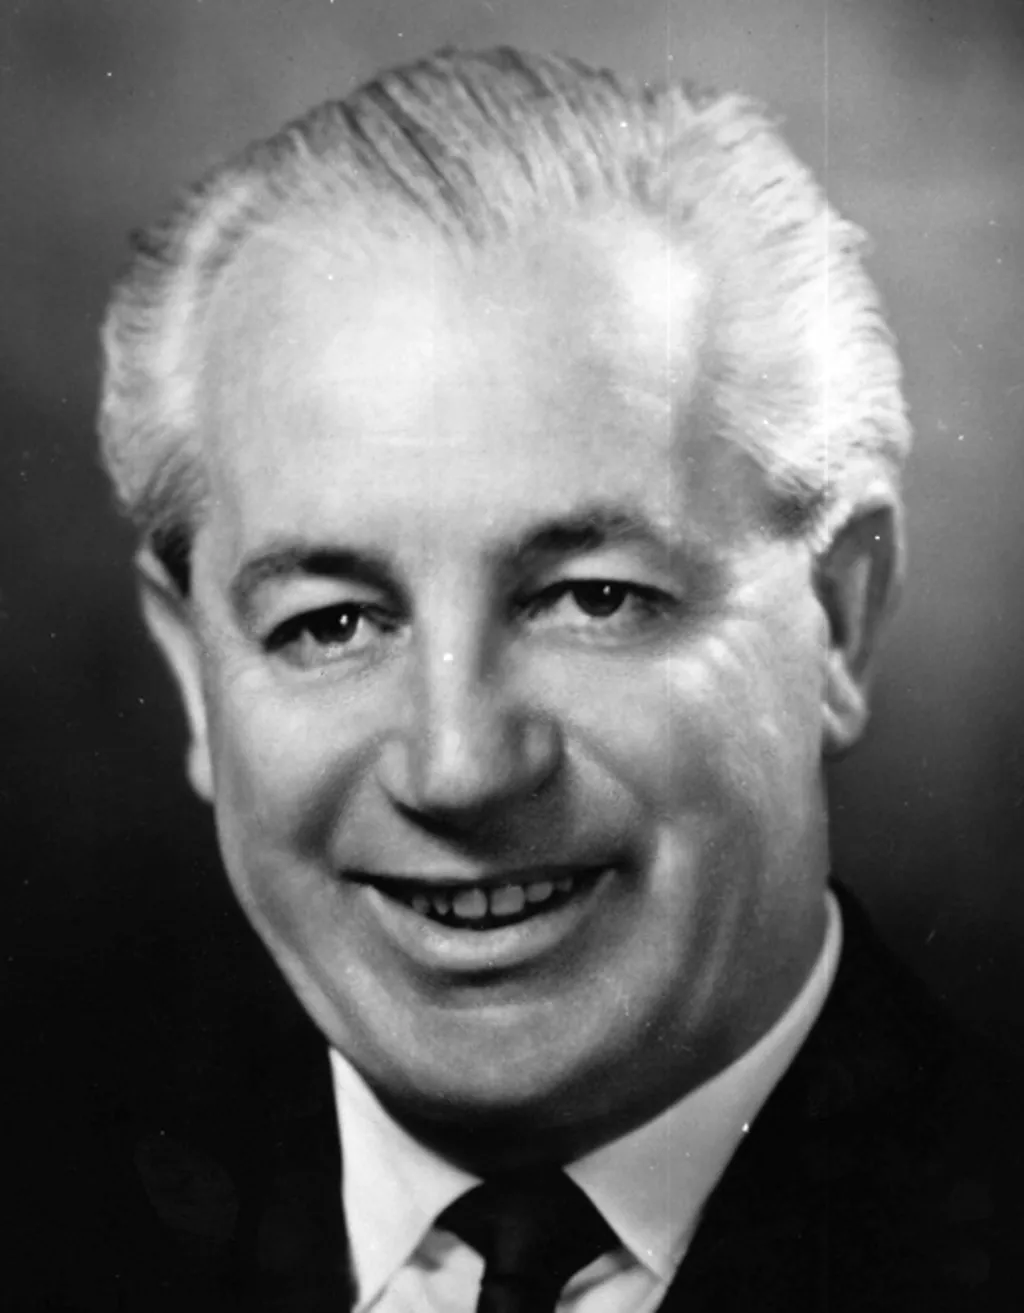 Black and white headshot portrait of Harold Holt, wearing a black tie and suit.